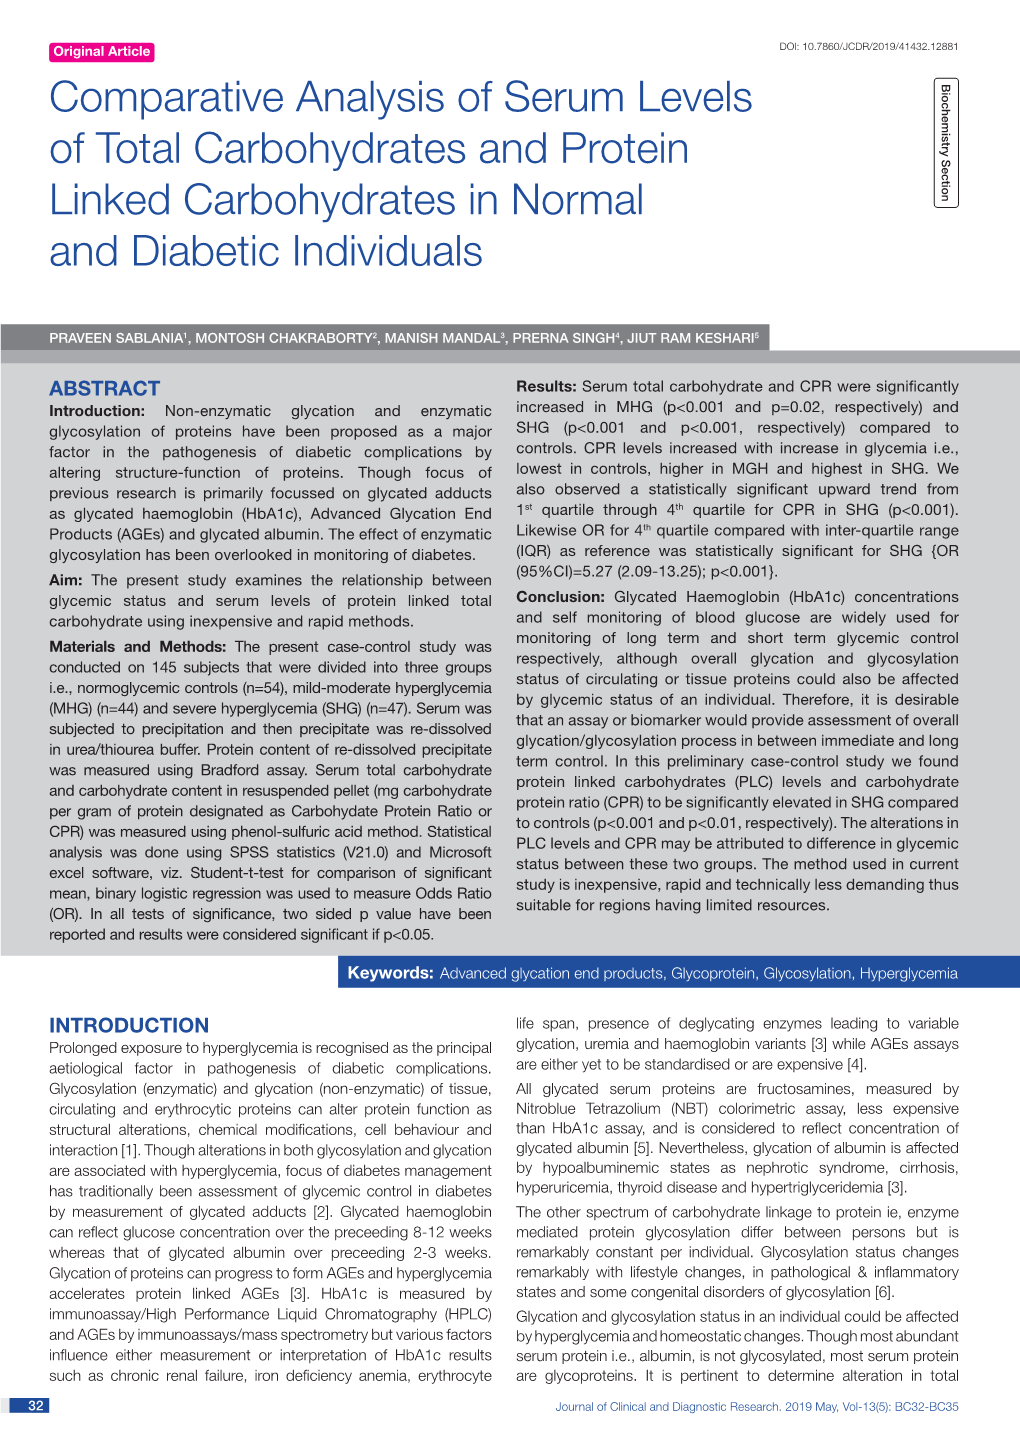 Comparative Analysis of Serum Levels of Total Carbohydrates and Protein Linked Carbohydrates in Normal and Diabetic Individuals